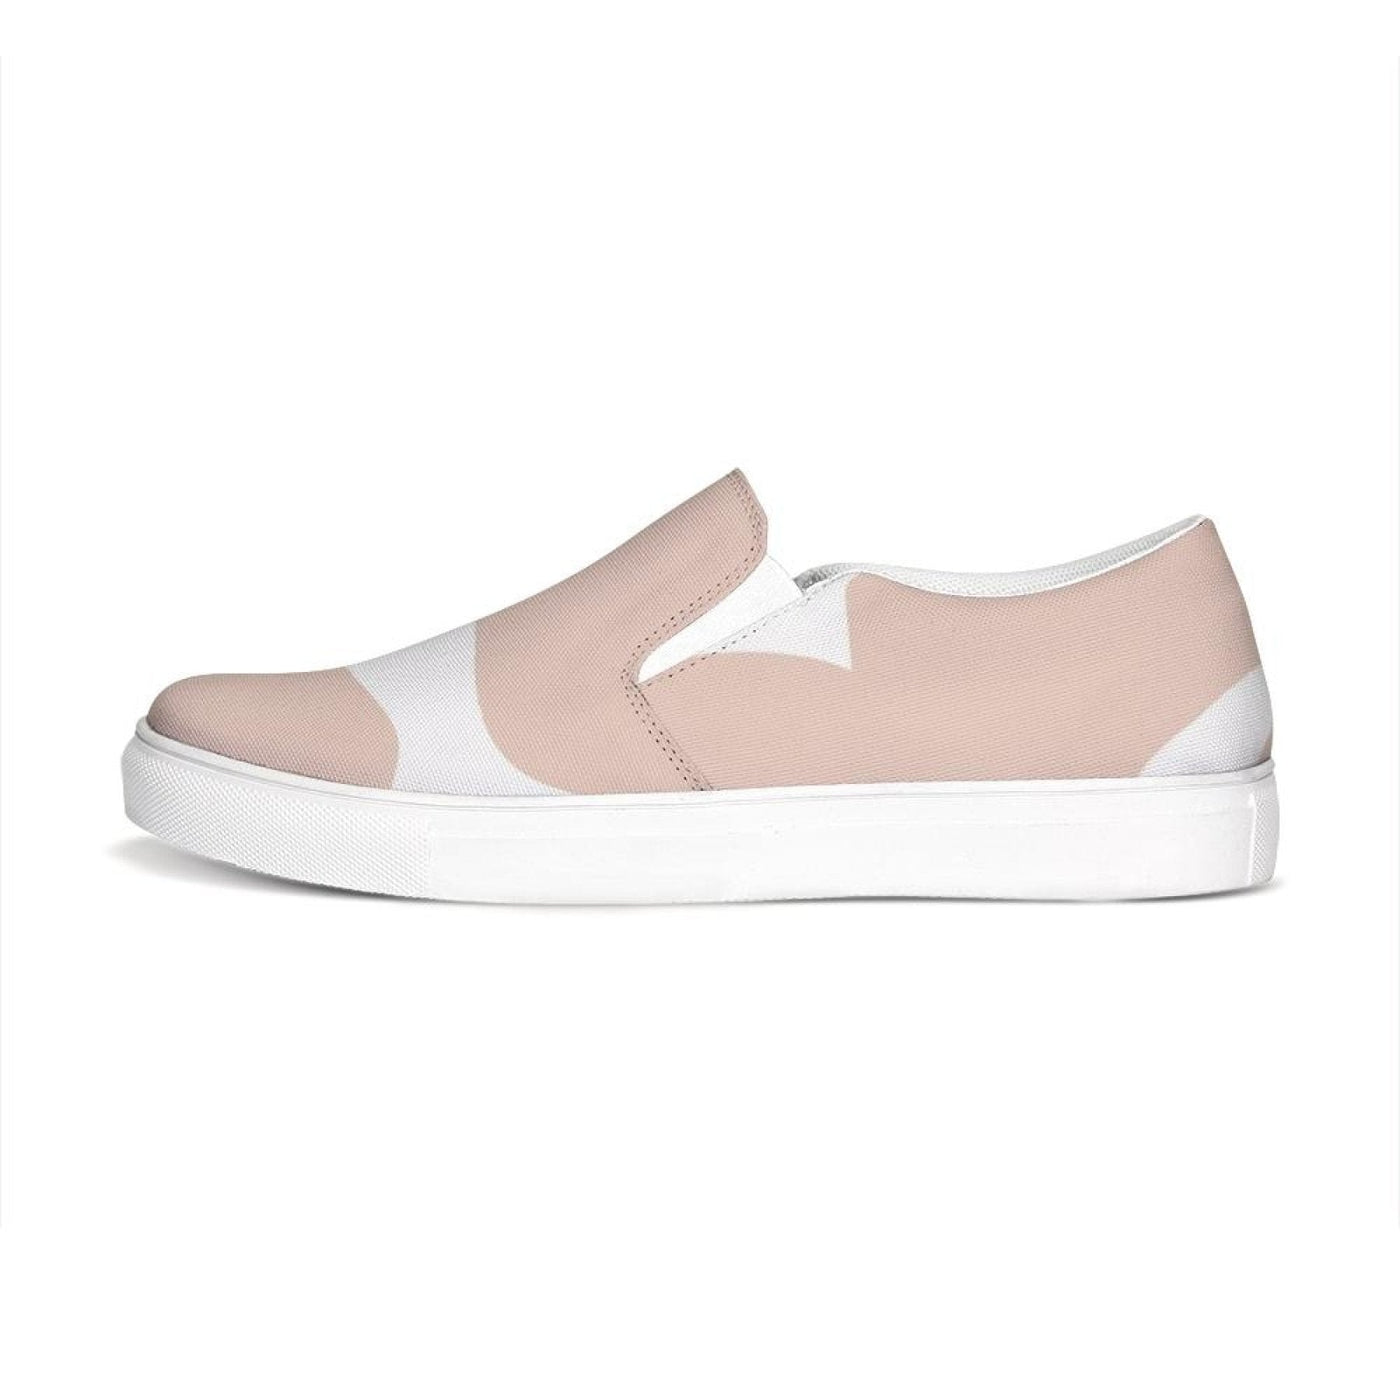 Womens Sneakers Peach & White Low Top Slip-on Canvas Shoes - Womens | Sneakers